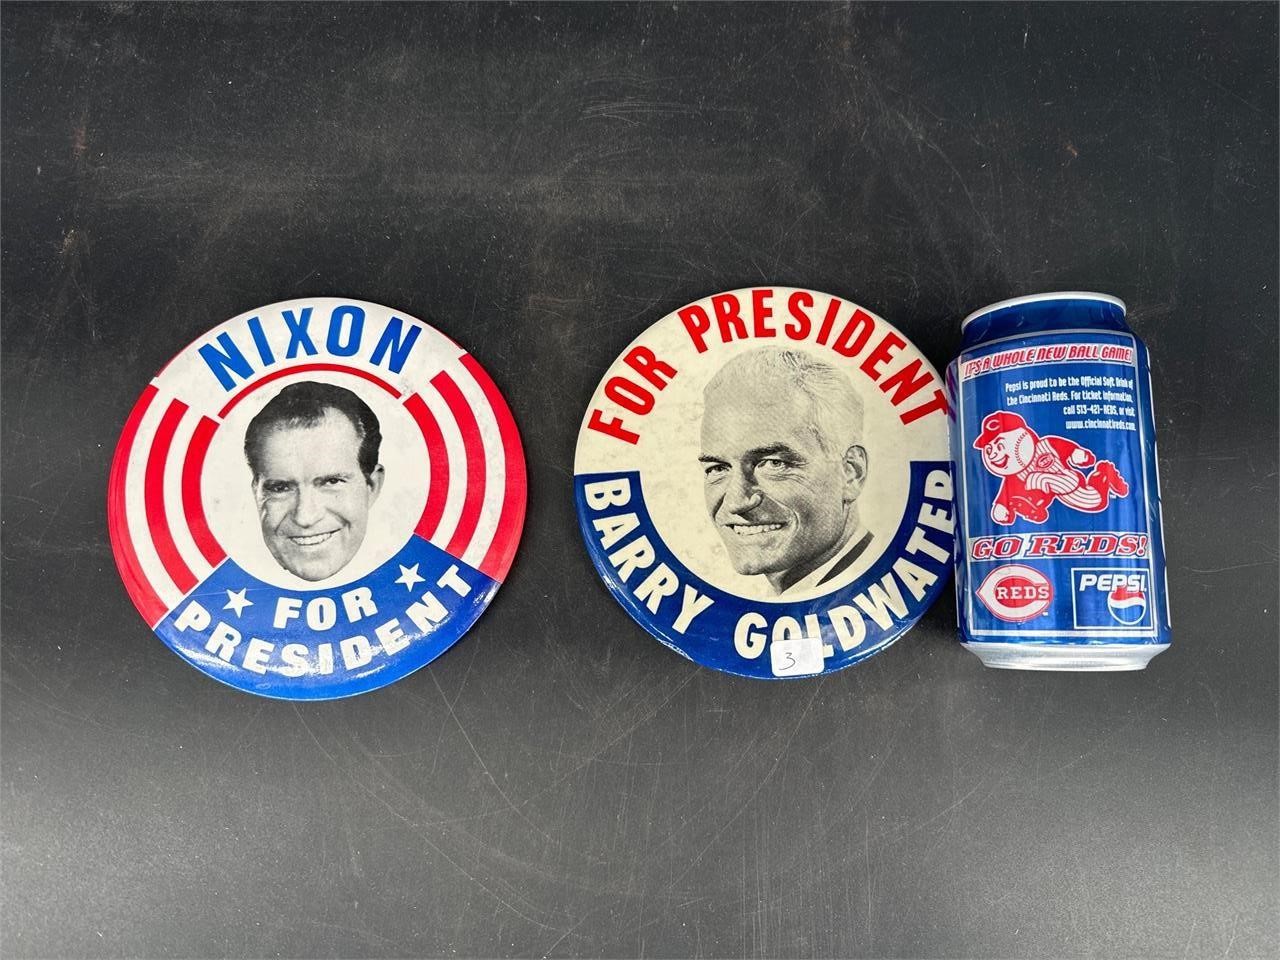 LOT OF 2 6 INCH POLITICAL BUTTONS NIXON/GOLDWATER